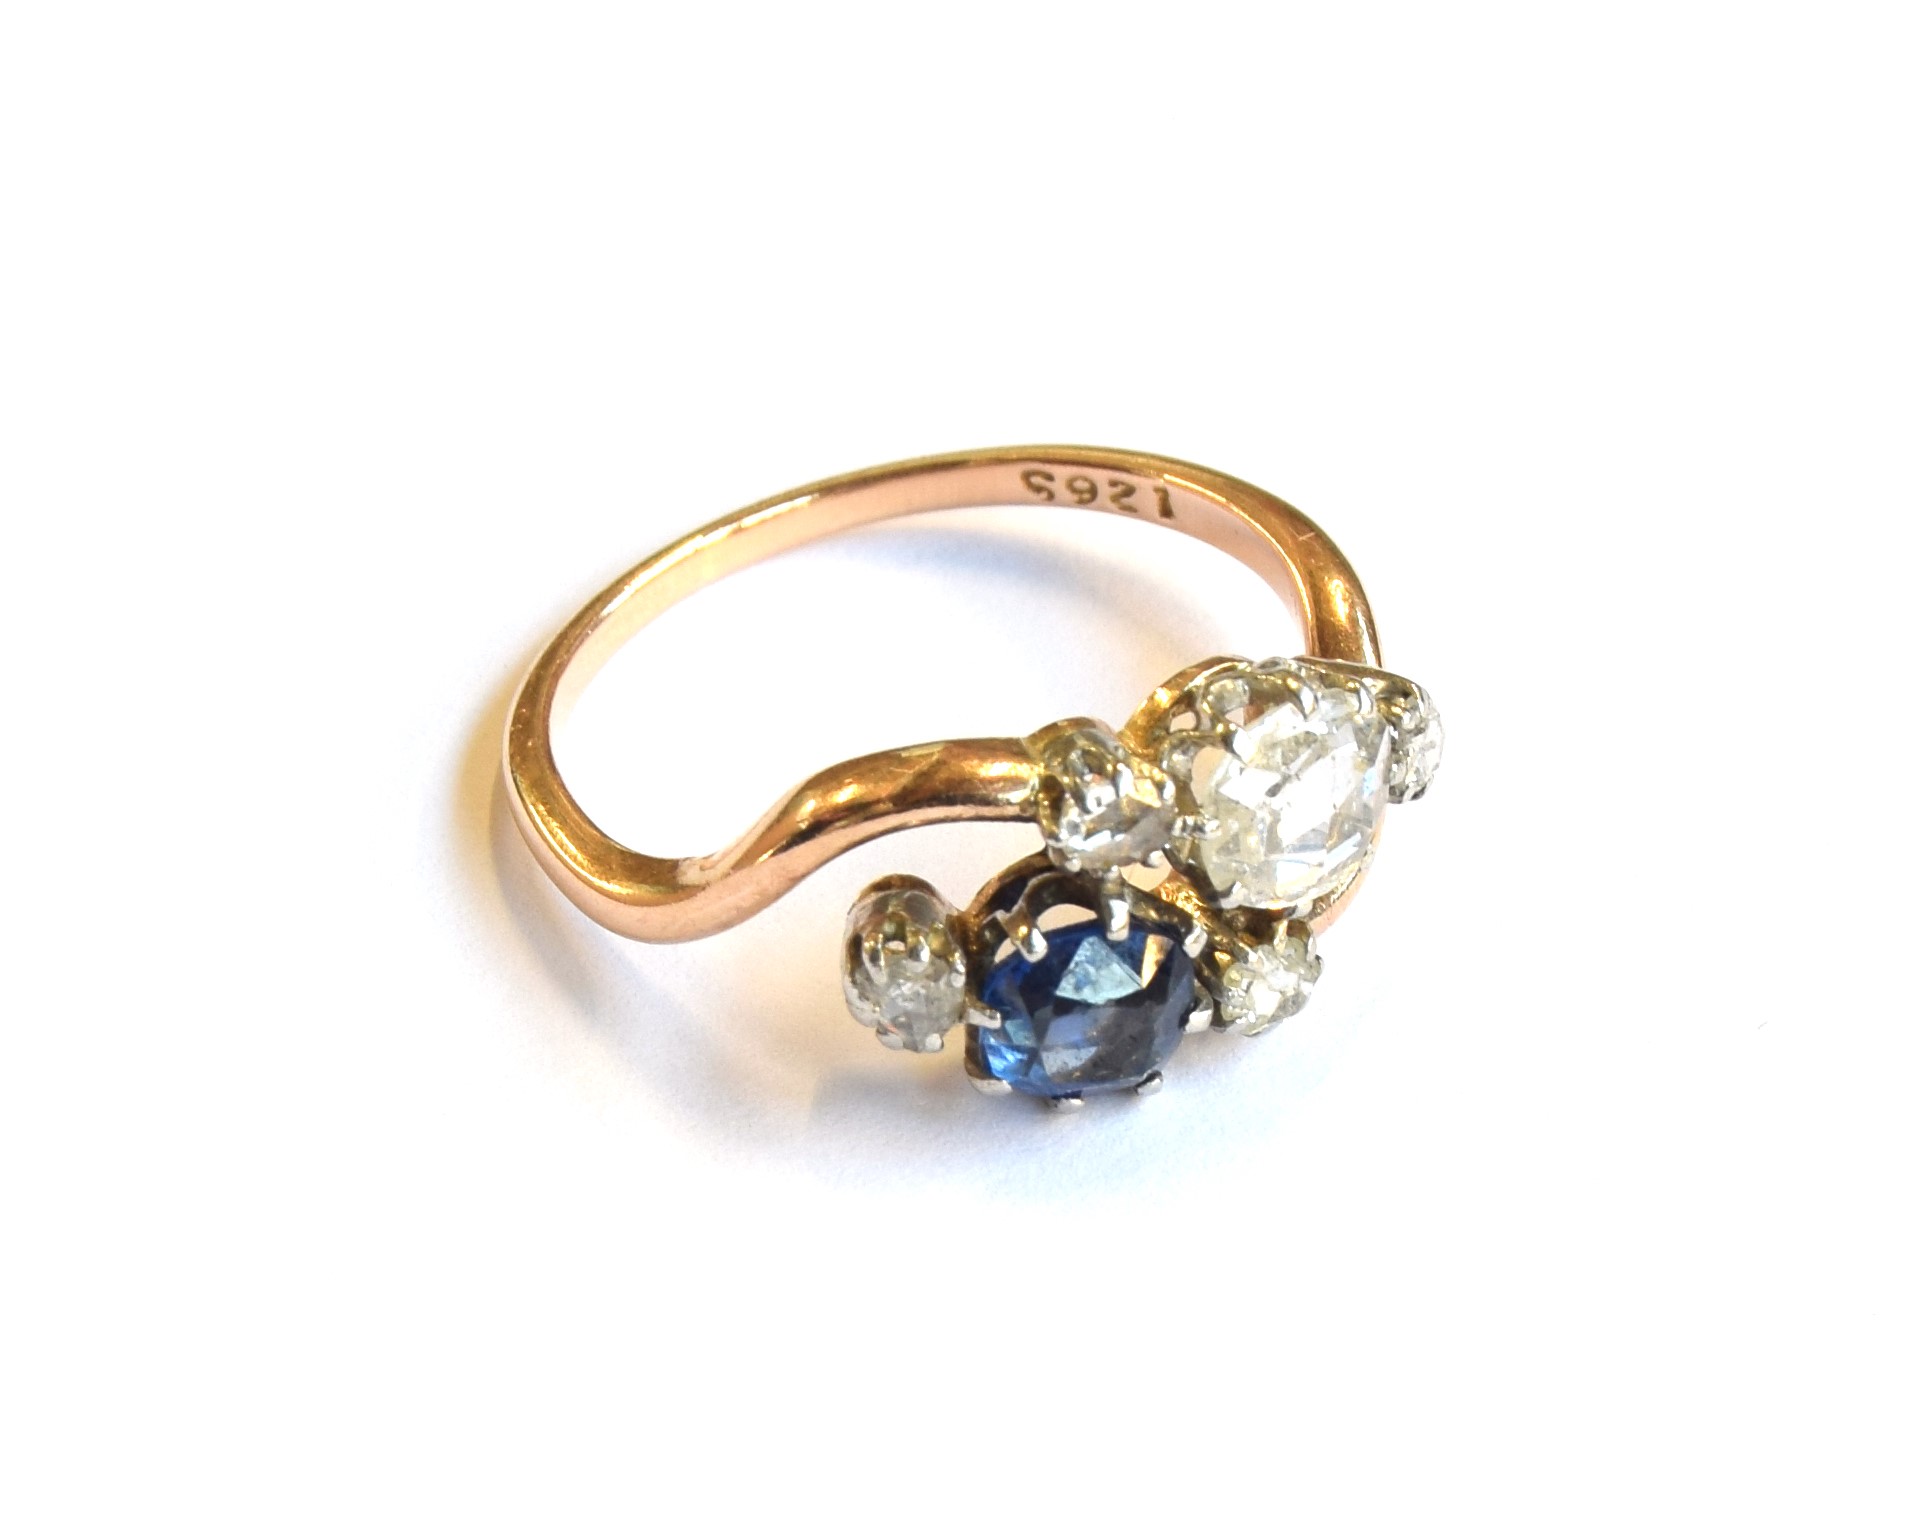 An early 20th century 18ct gold 'Toi et Moi' diamond and sapphire crossover ring, the large rose cut - Image 6 of 6